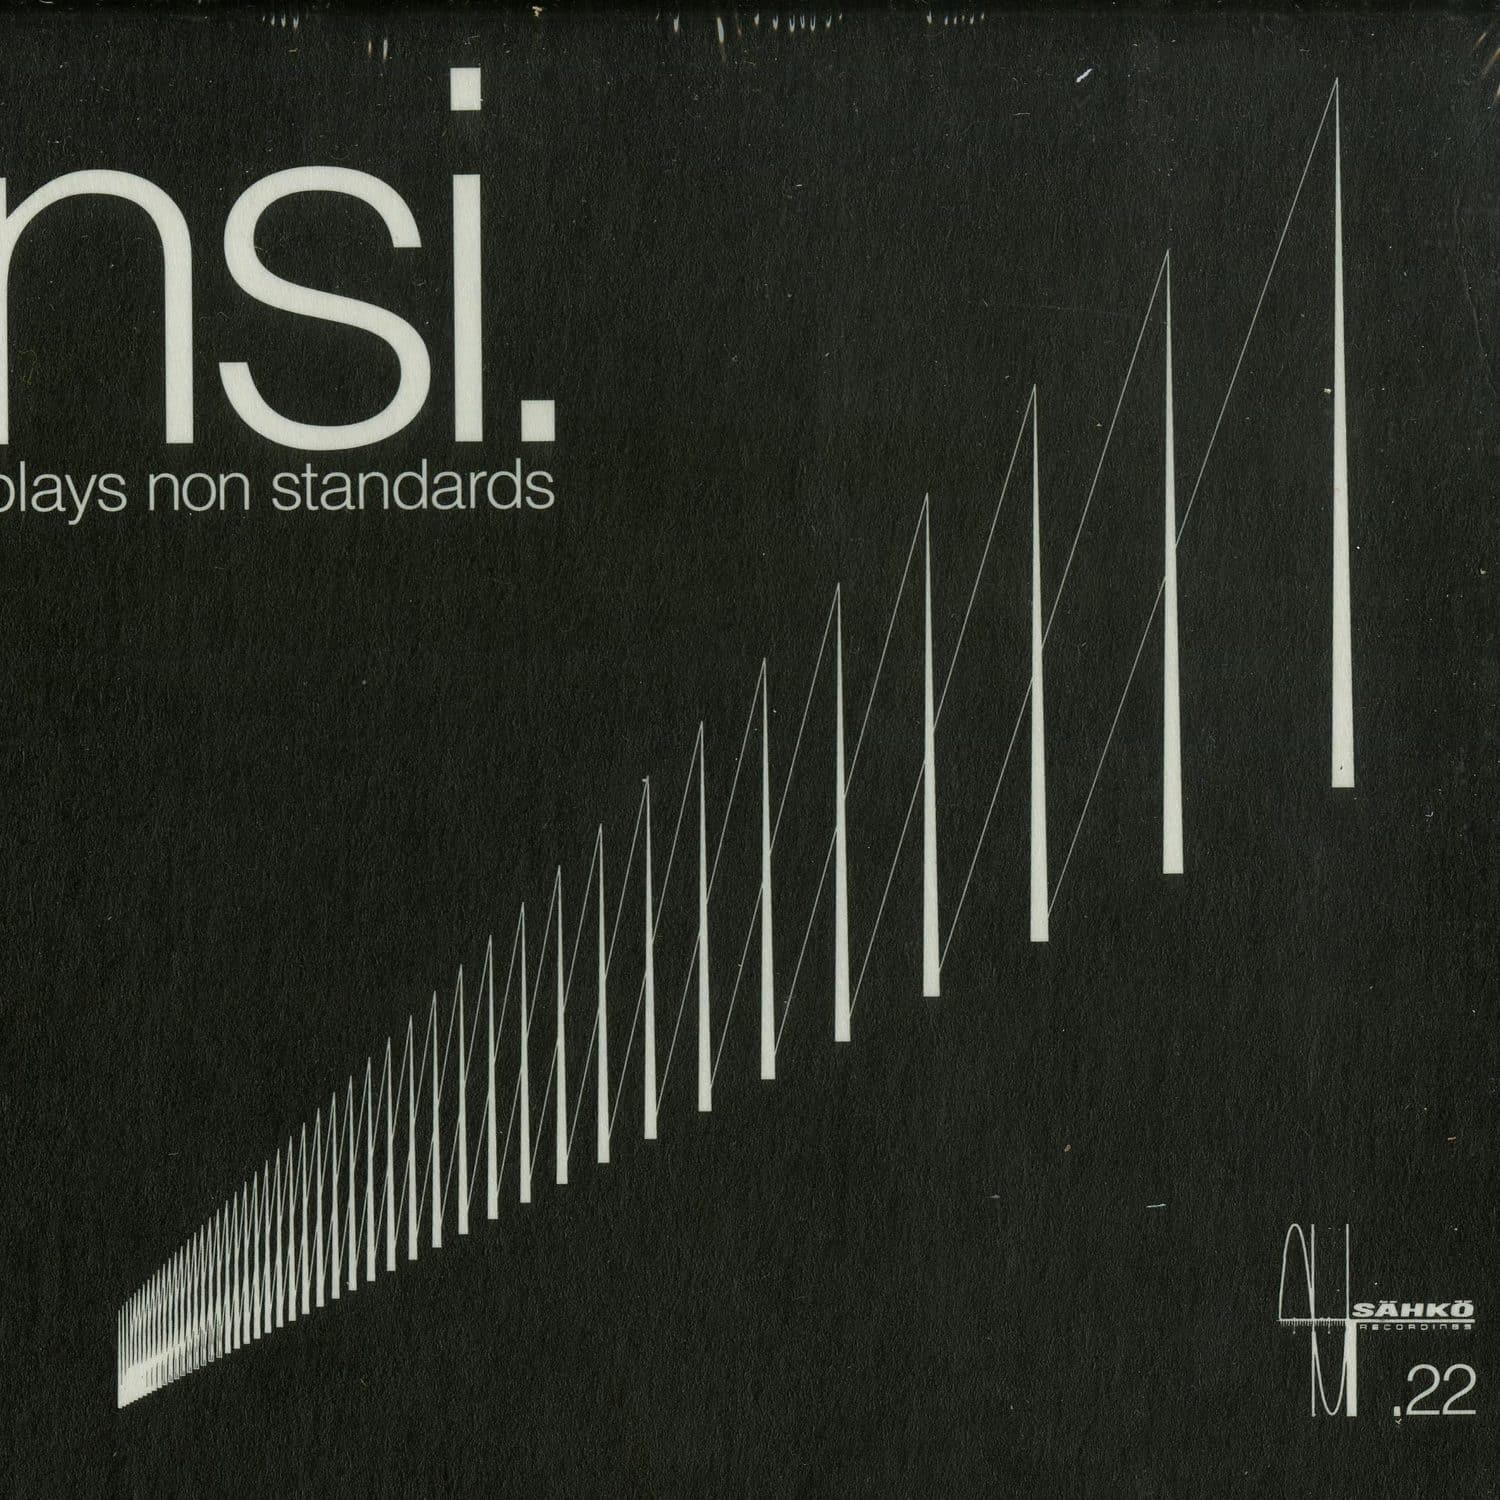 NSI - PLAY NON STANDARDS 